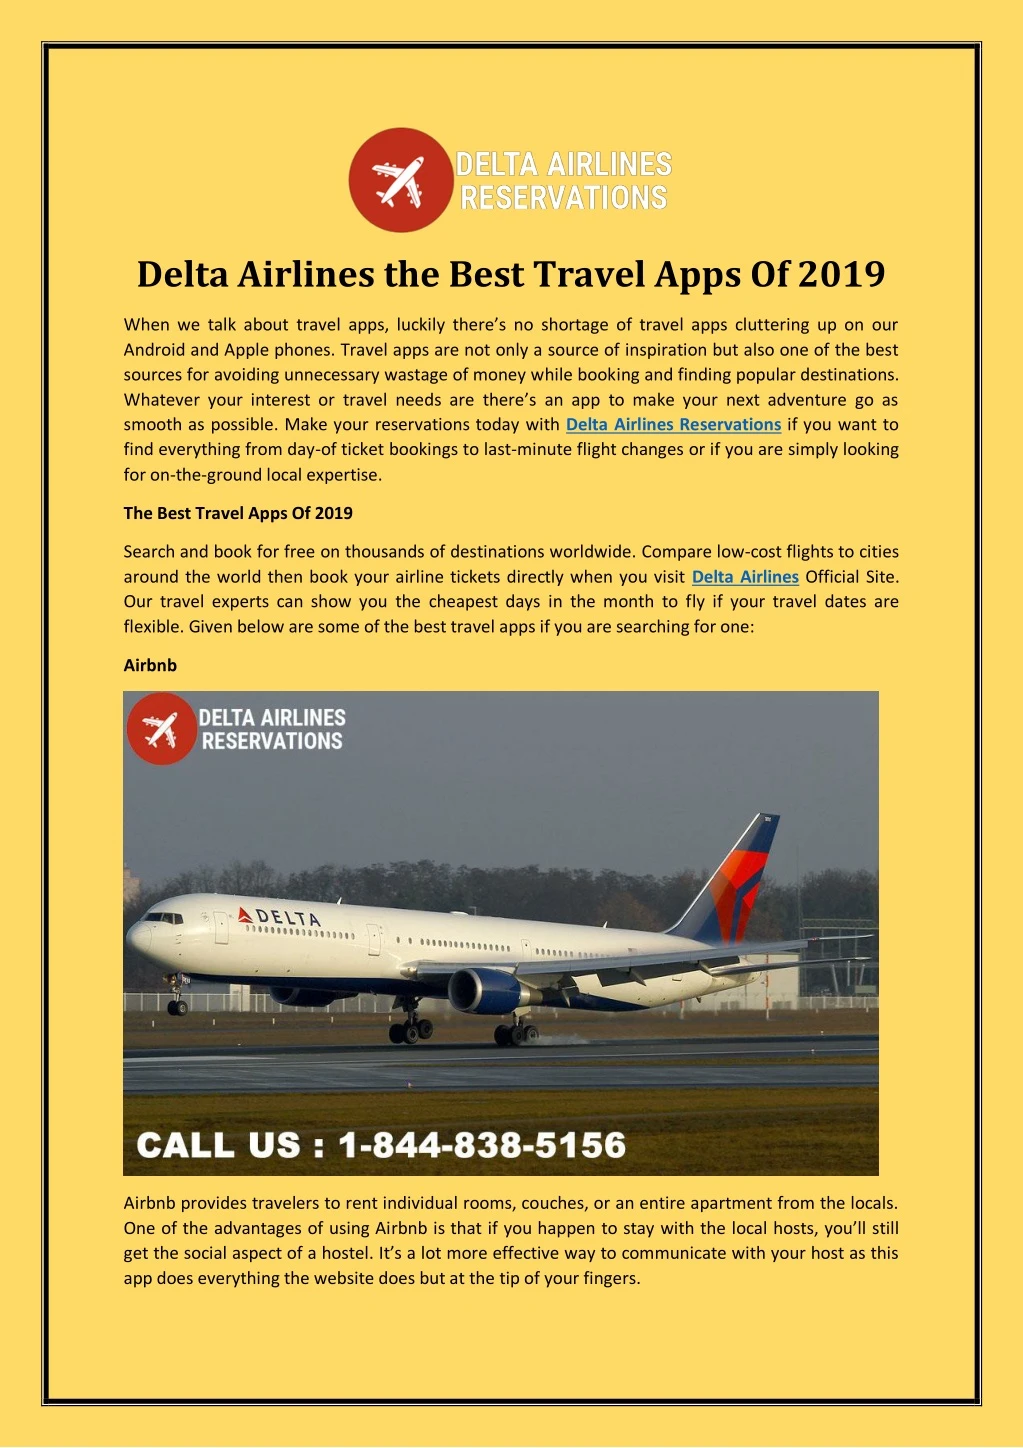 delta airlines the best travel apps of 2019